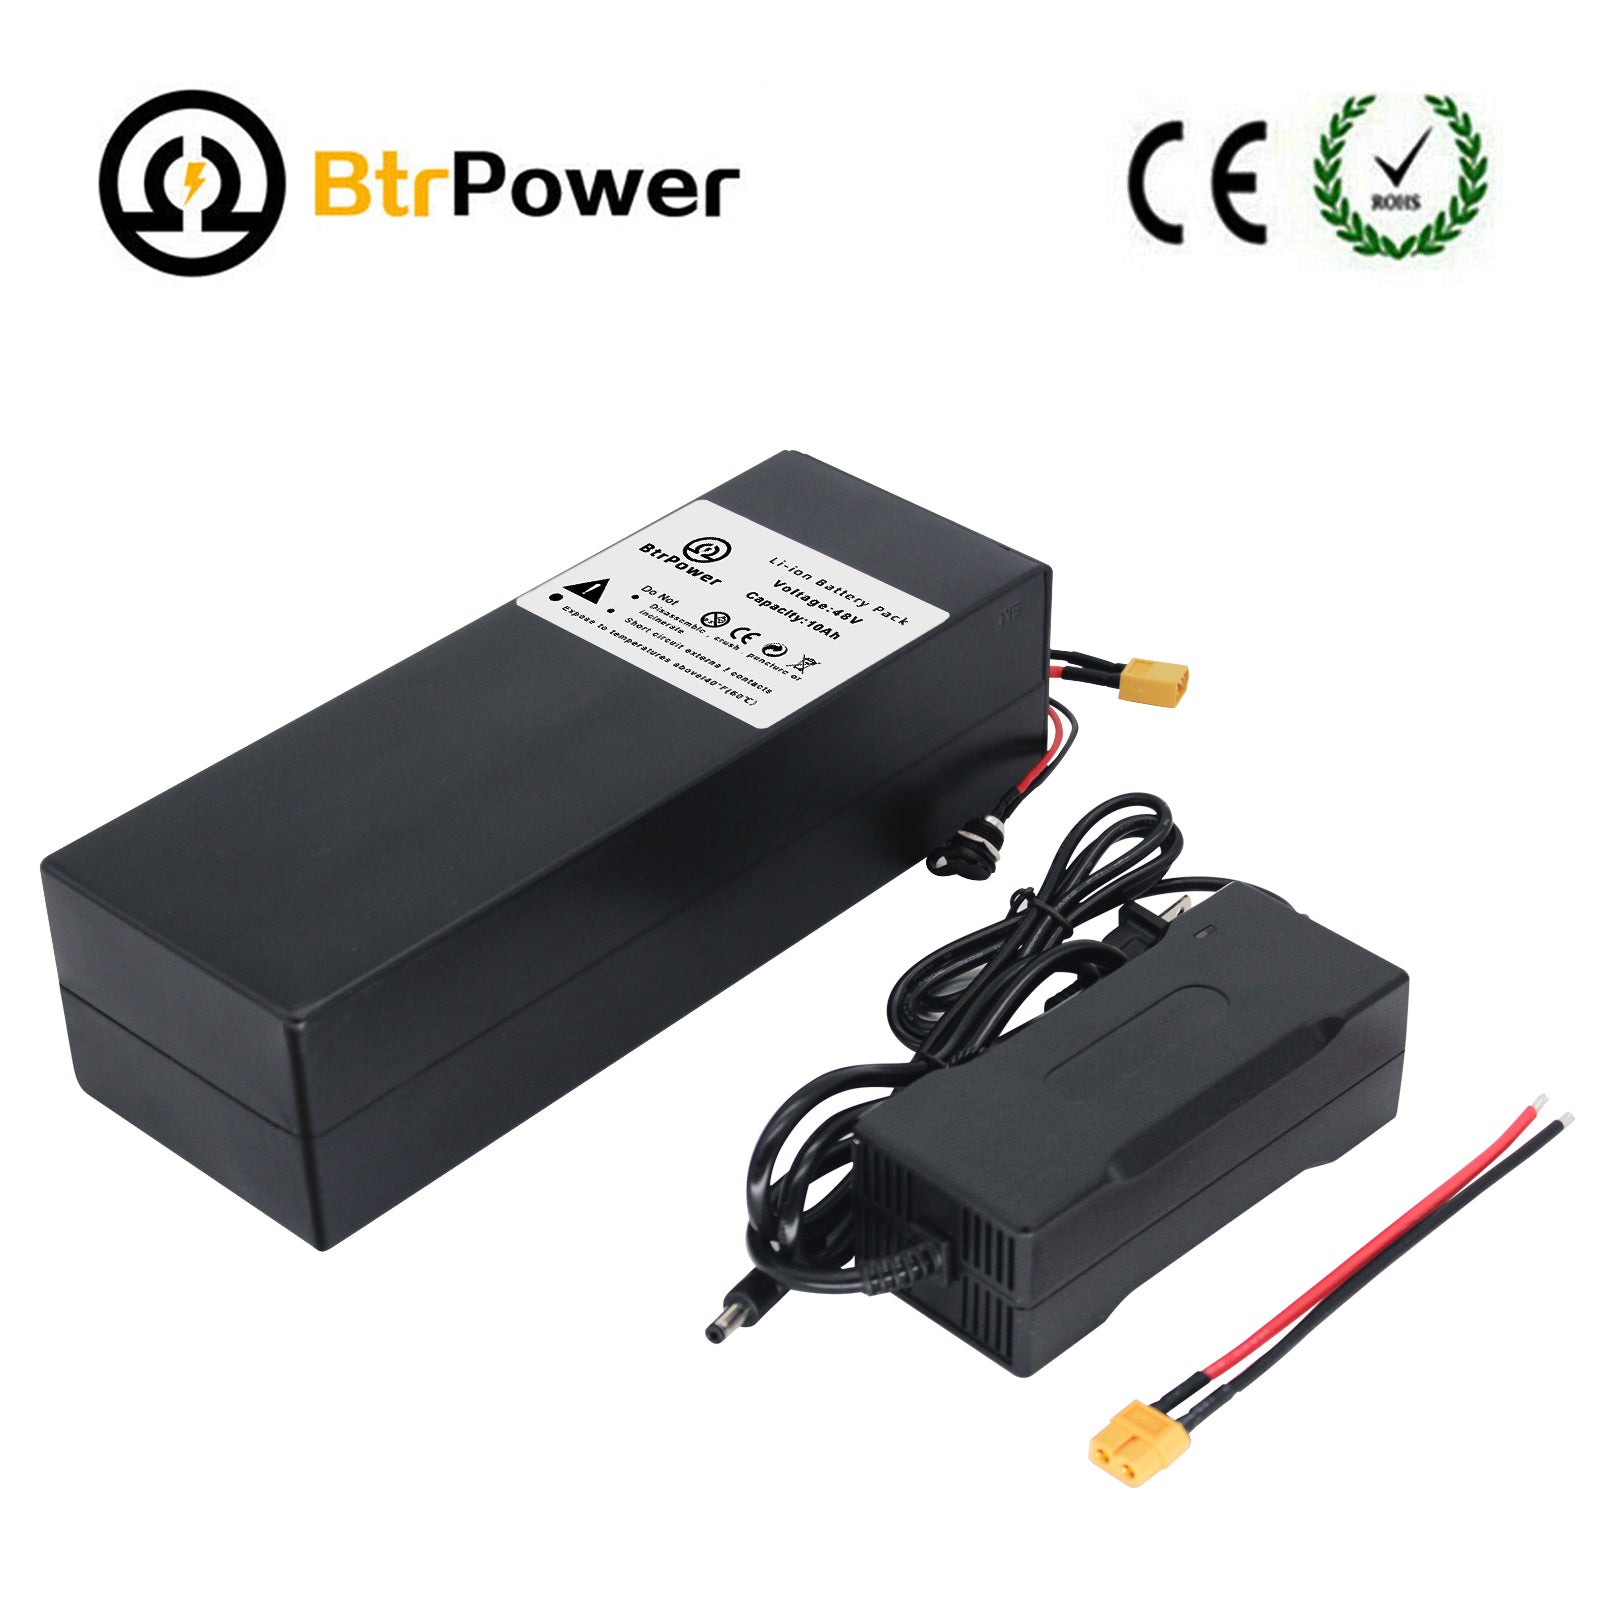 BtrPower Ebike Battery 48V 10AH, Li- ion Battery Pack with 3A Charger